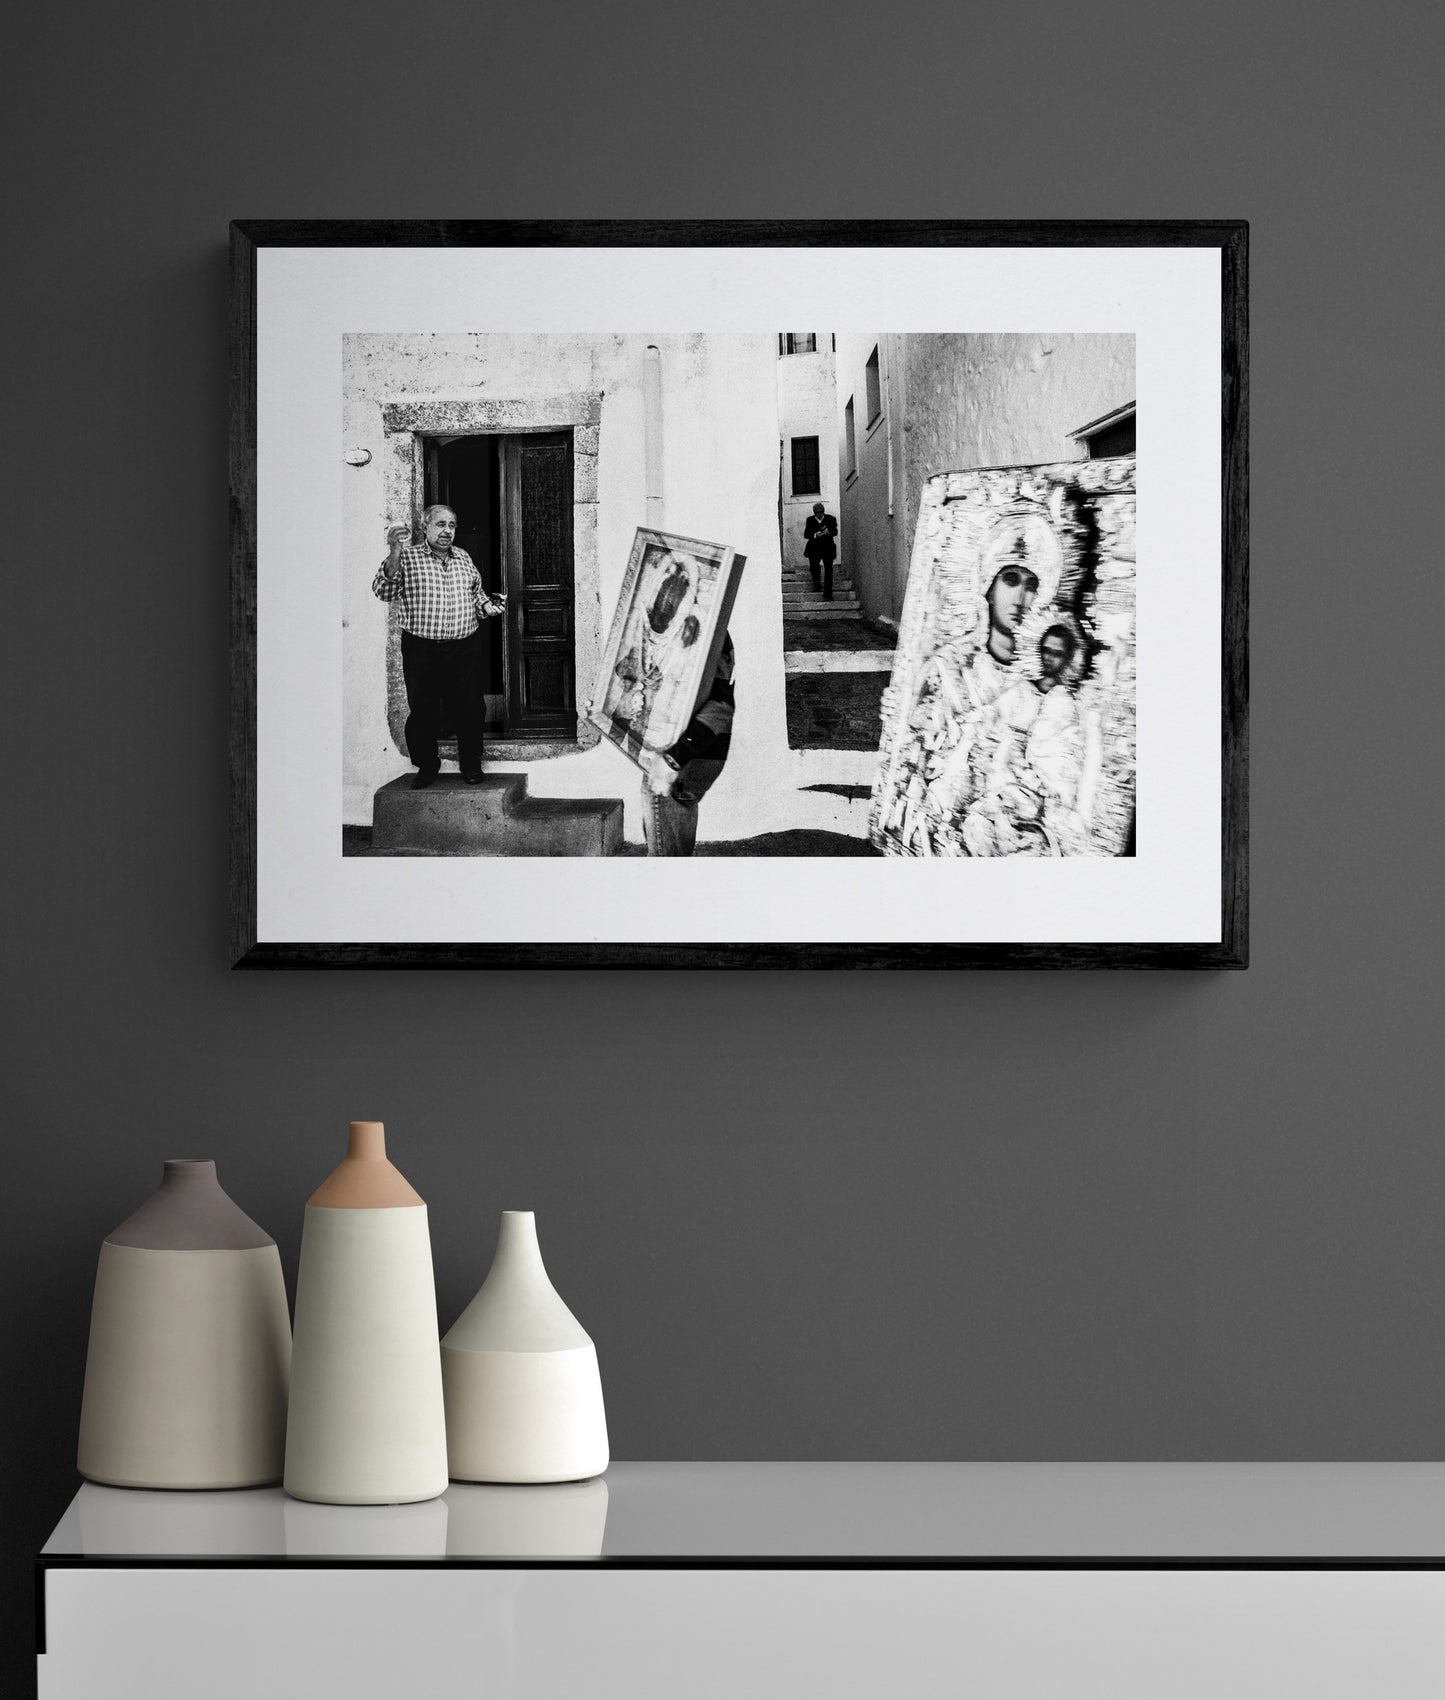 Black and White Photography Wall Art Greece | Litany in Patmos Dodecanese by George Tatakis - single framed photo